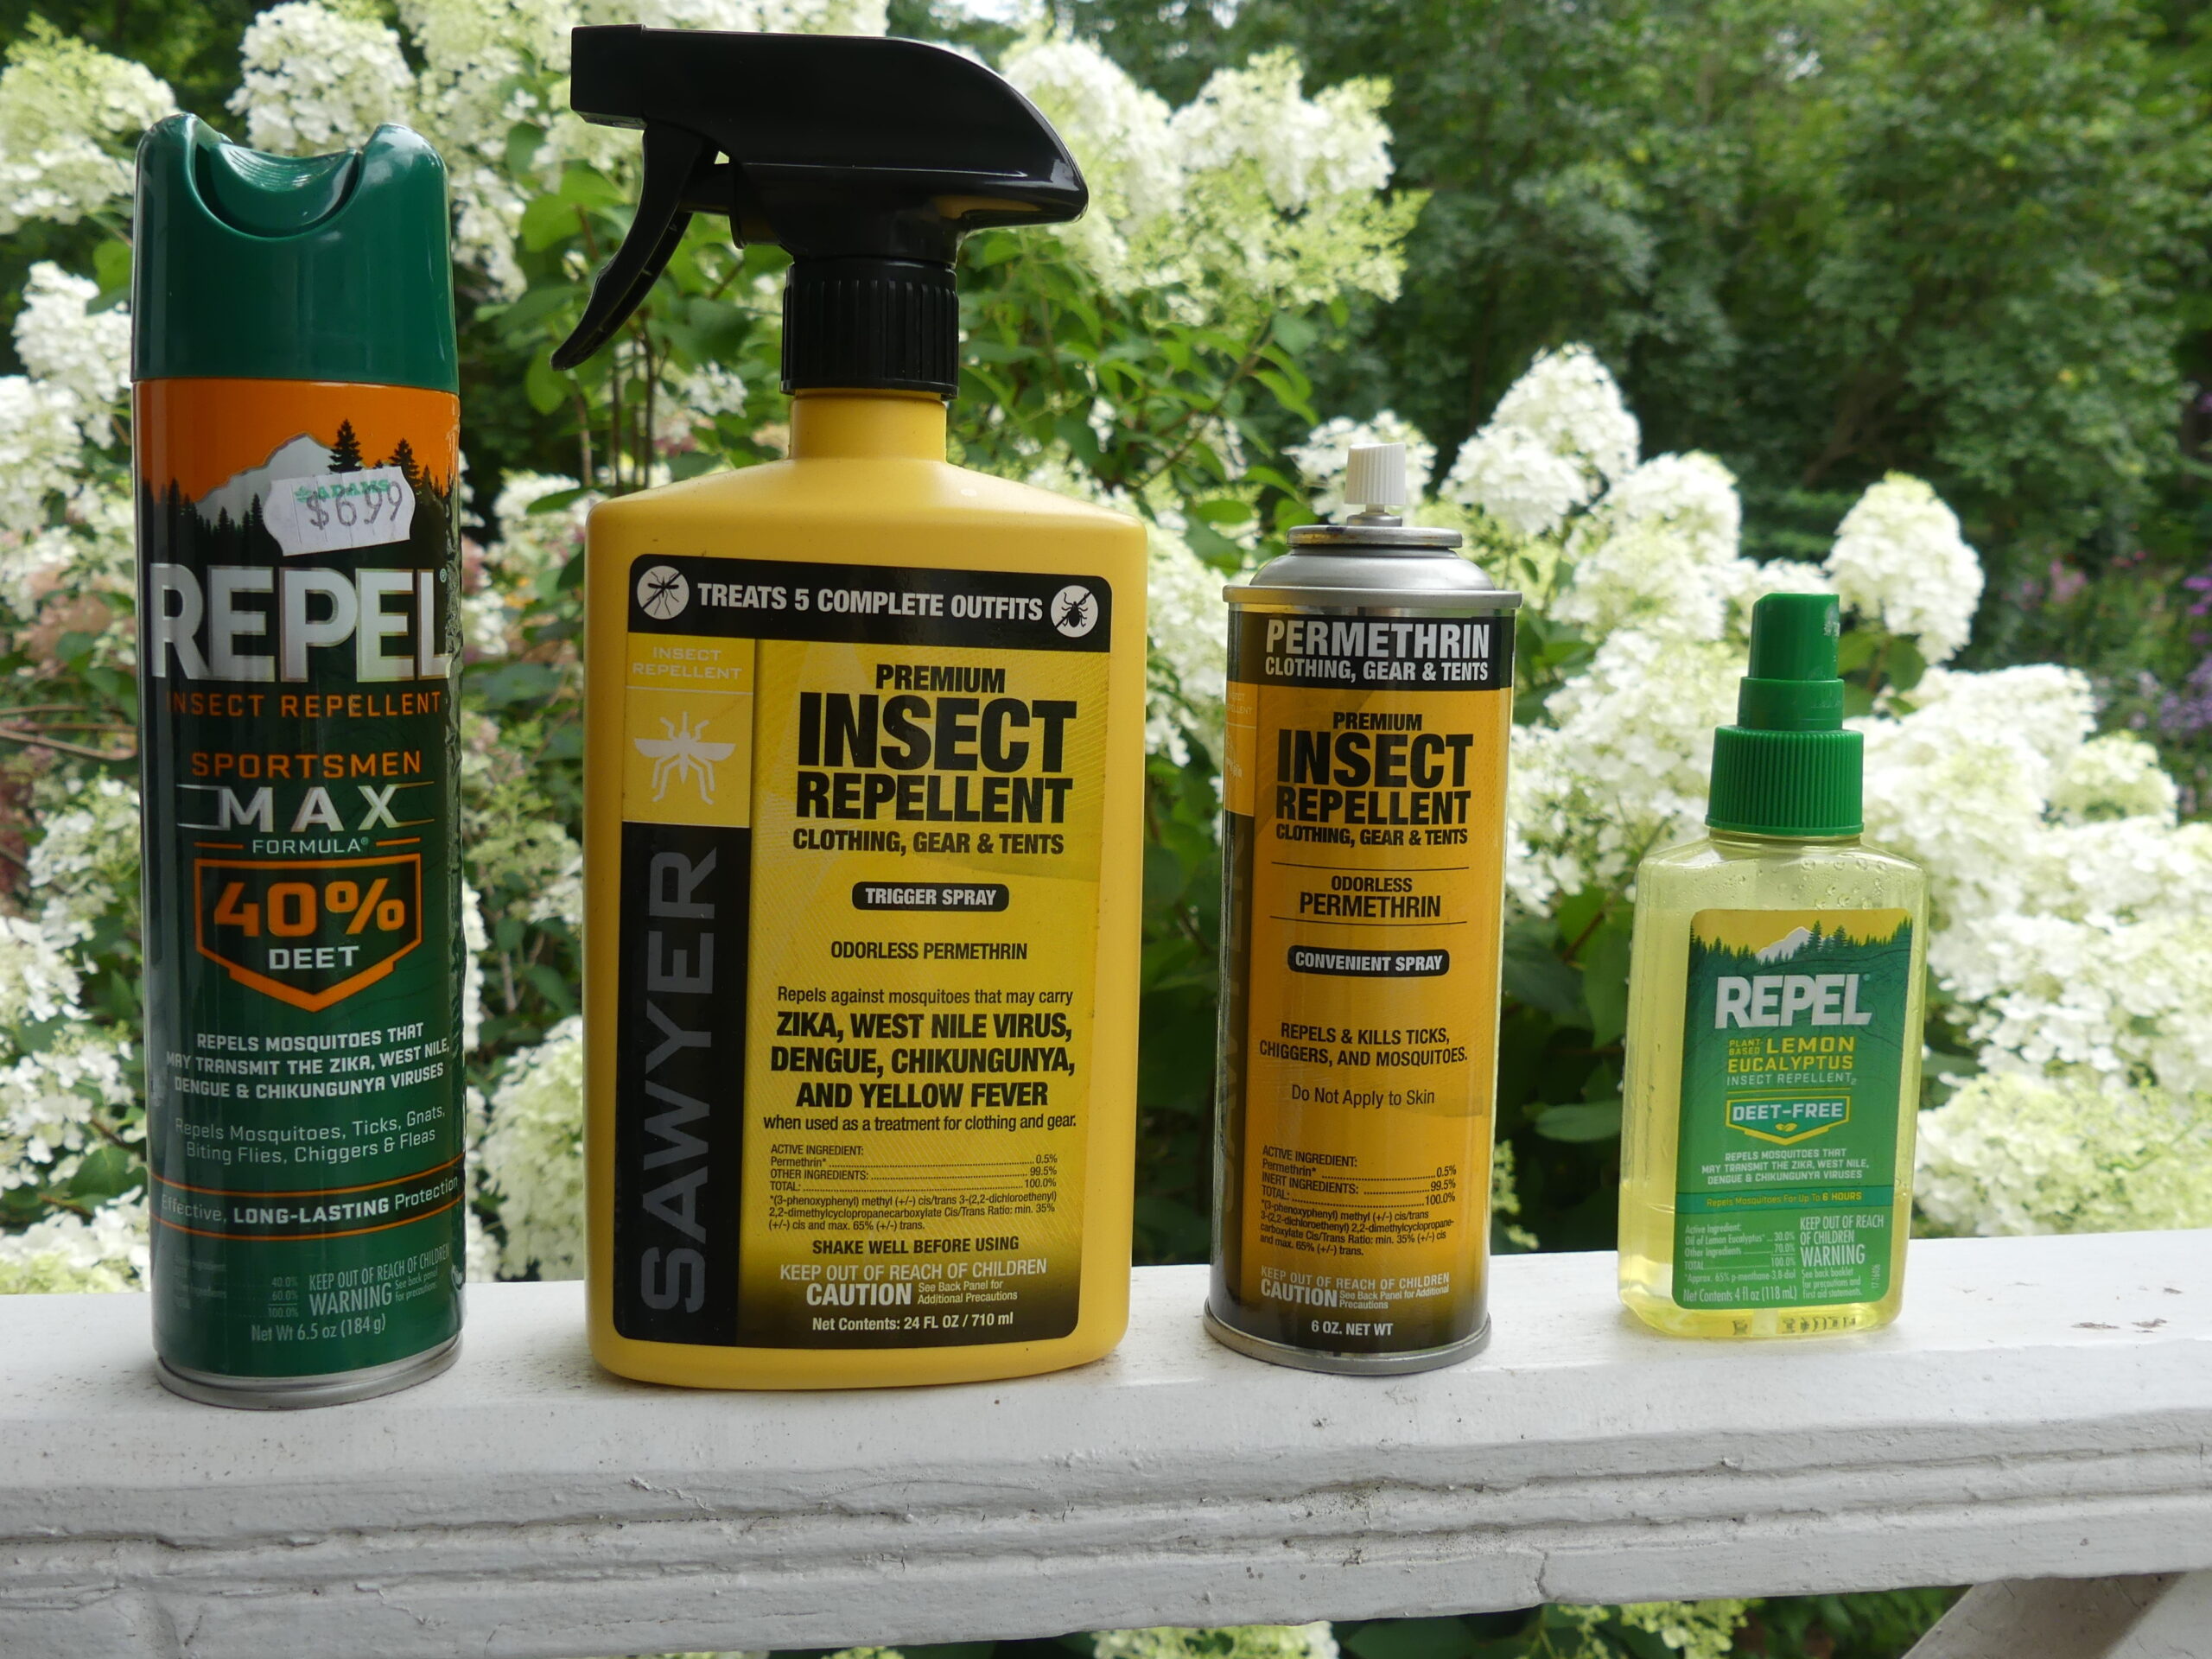 Insect repellents that I’ve used with great success for the past few years. The DEET product (left) will be great for ticks, mosquitoes and horse flies and should last all day.  Not to be used on the face though.  The yellow trigger bottle and aerosol can contain permethrin, which is applied to clothes and shoes as a repellent.  It will last up to a month. On the right is Repel’s brand of lemon eucalyptus, which can be used on the face (not in the eyes) and is plant based but only effective for about an hour. ANDREW MESSINGER